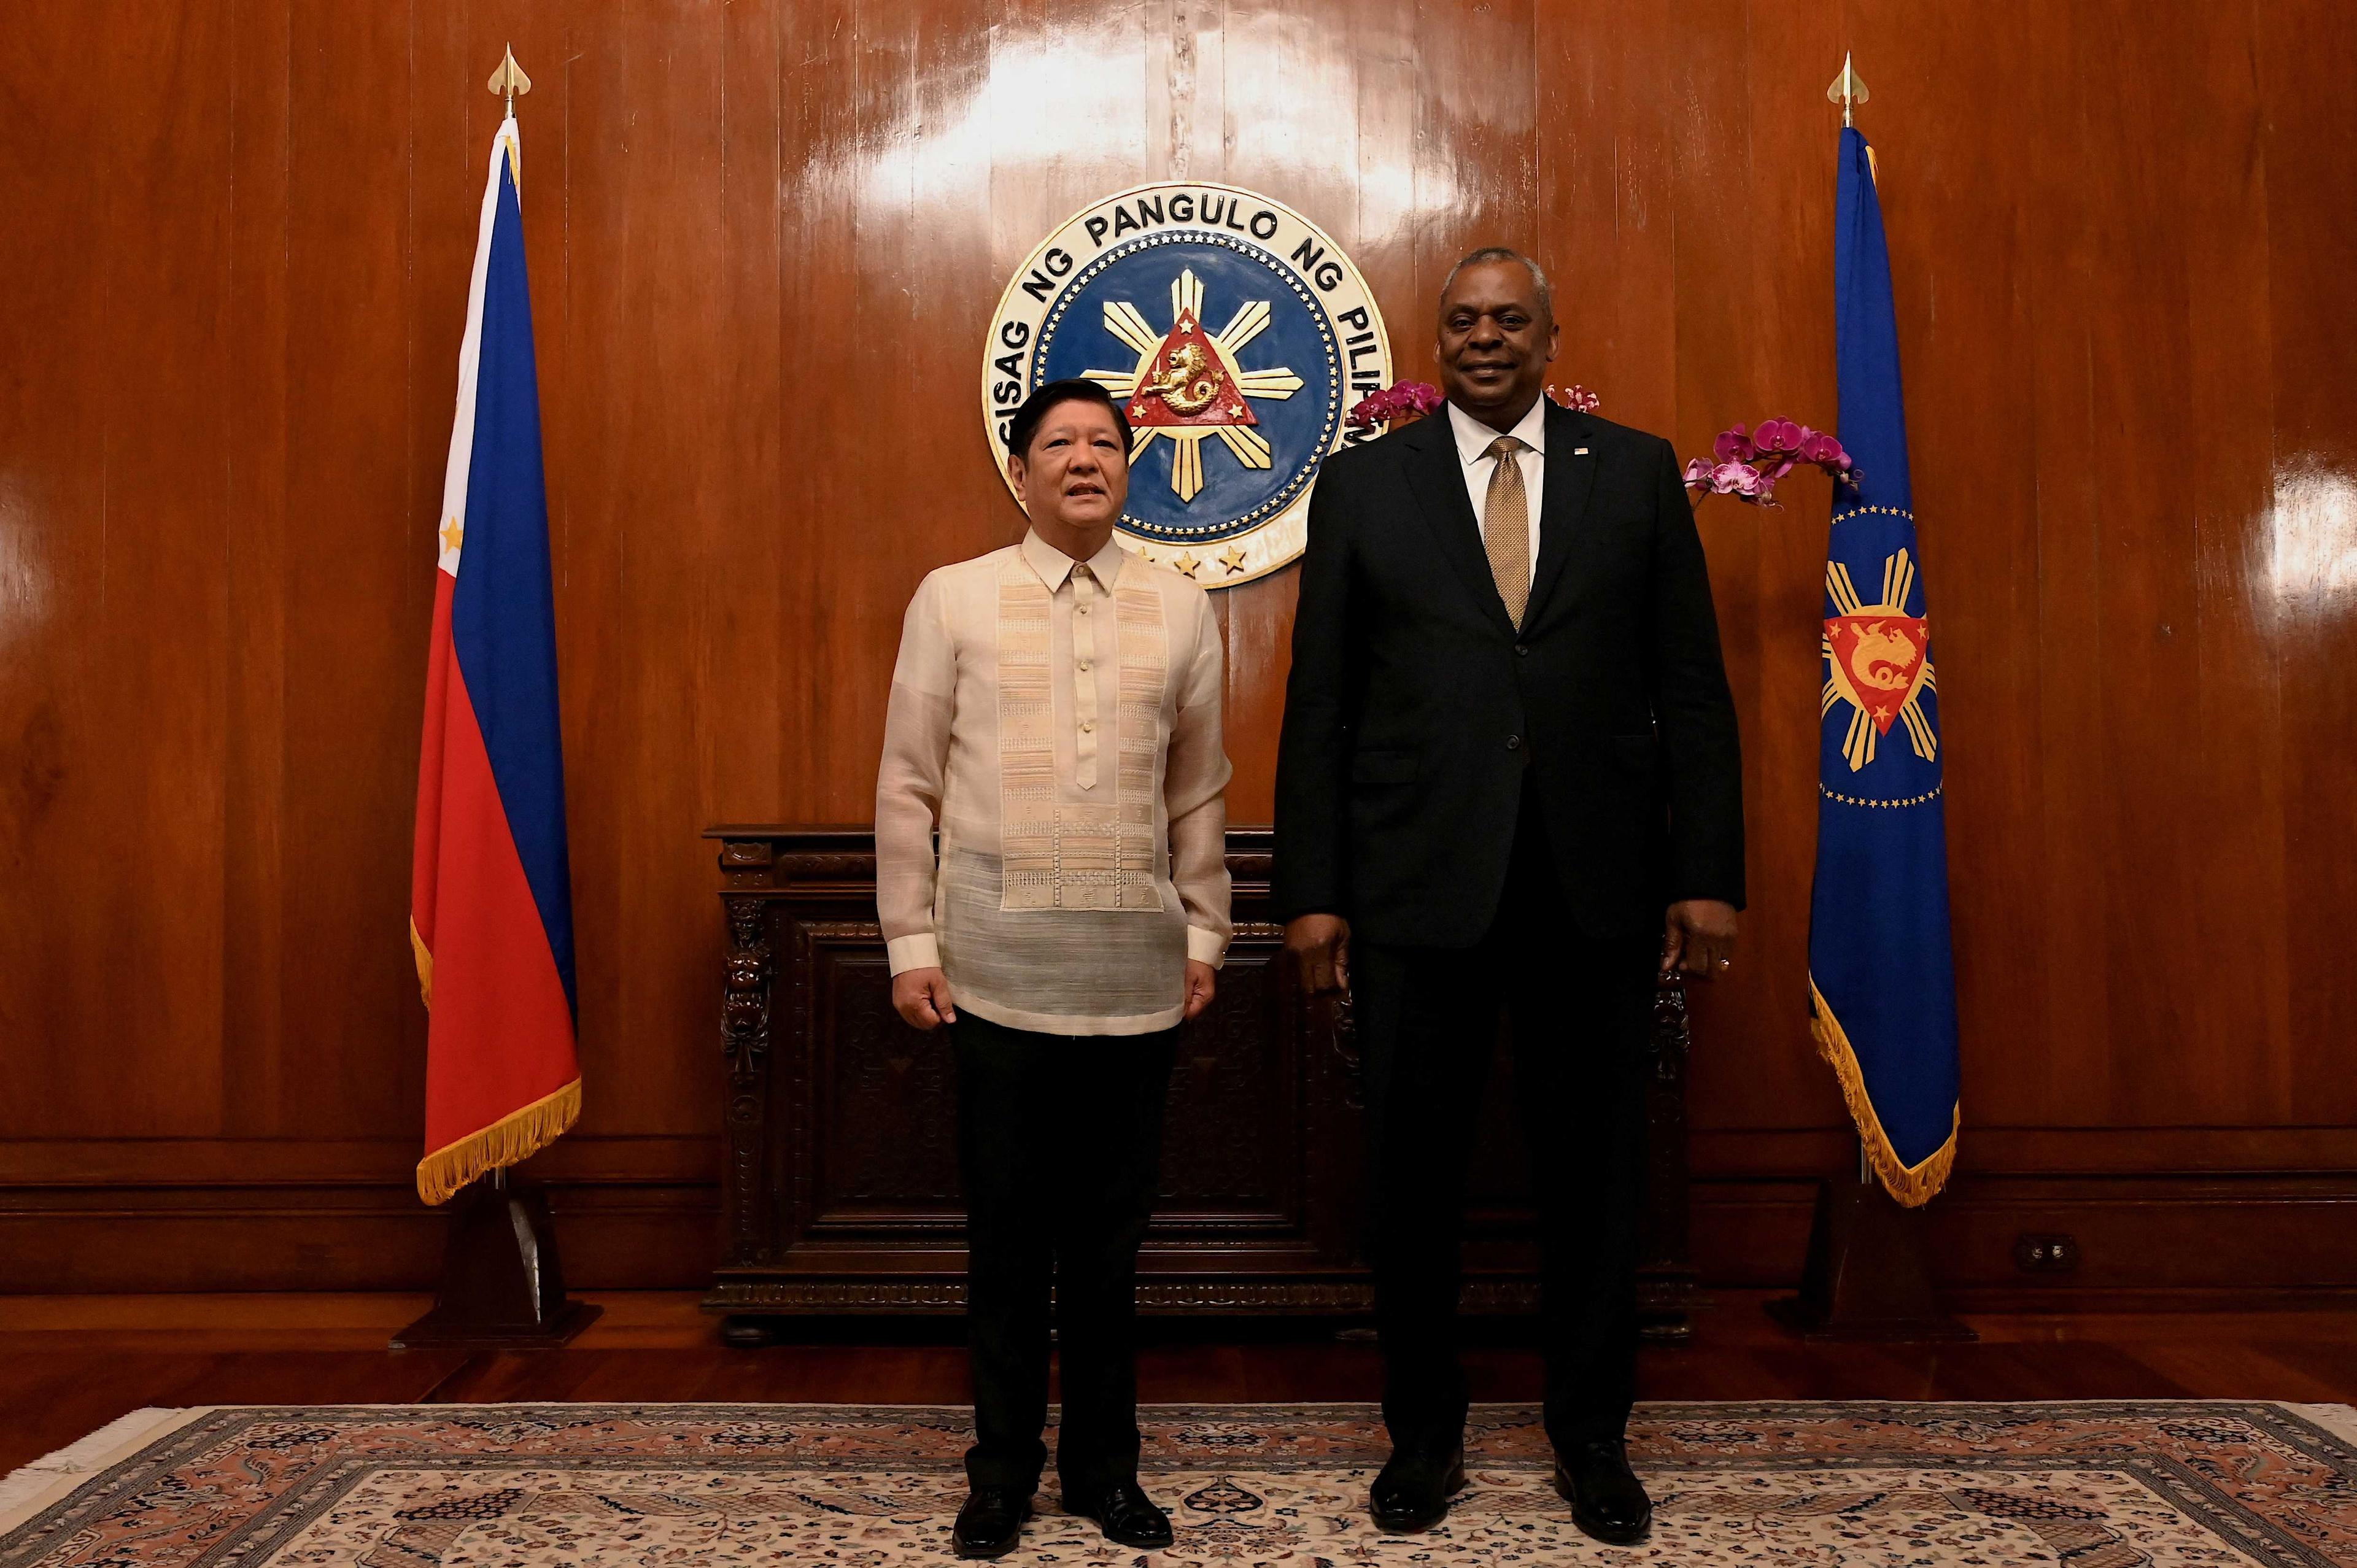 US Defence Secretary Lloyd Austin III meets Philippines President Ferdinand 'Bongbong' Marcos Jr at the Malacanang presidential palace in Manila, Philippines, Feb 2. Photo: Reuters